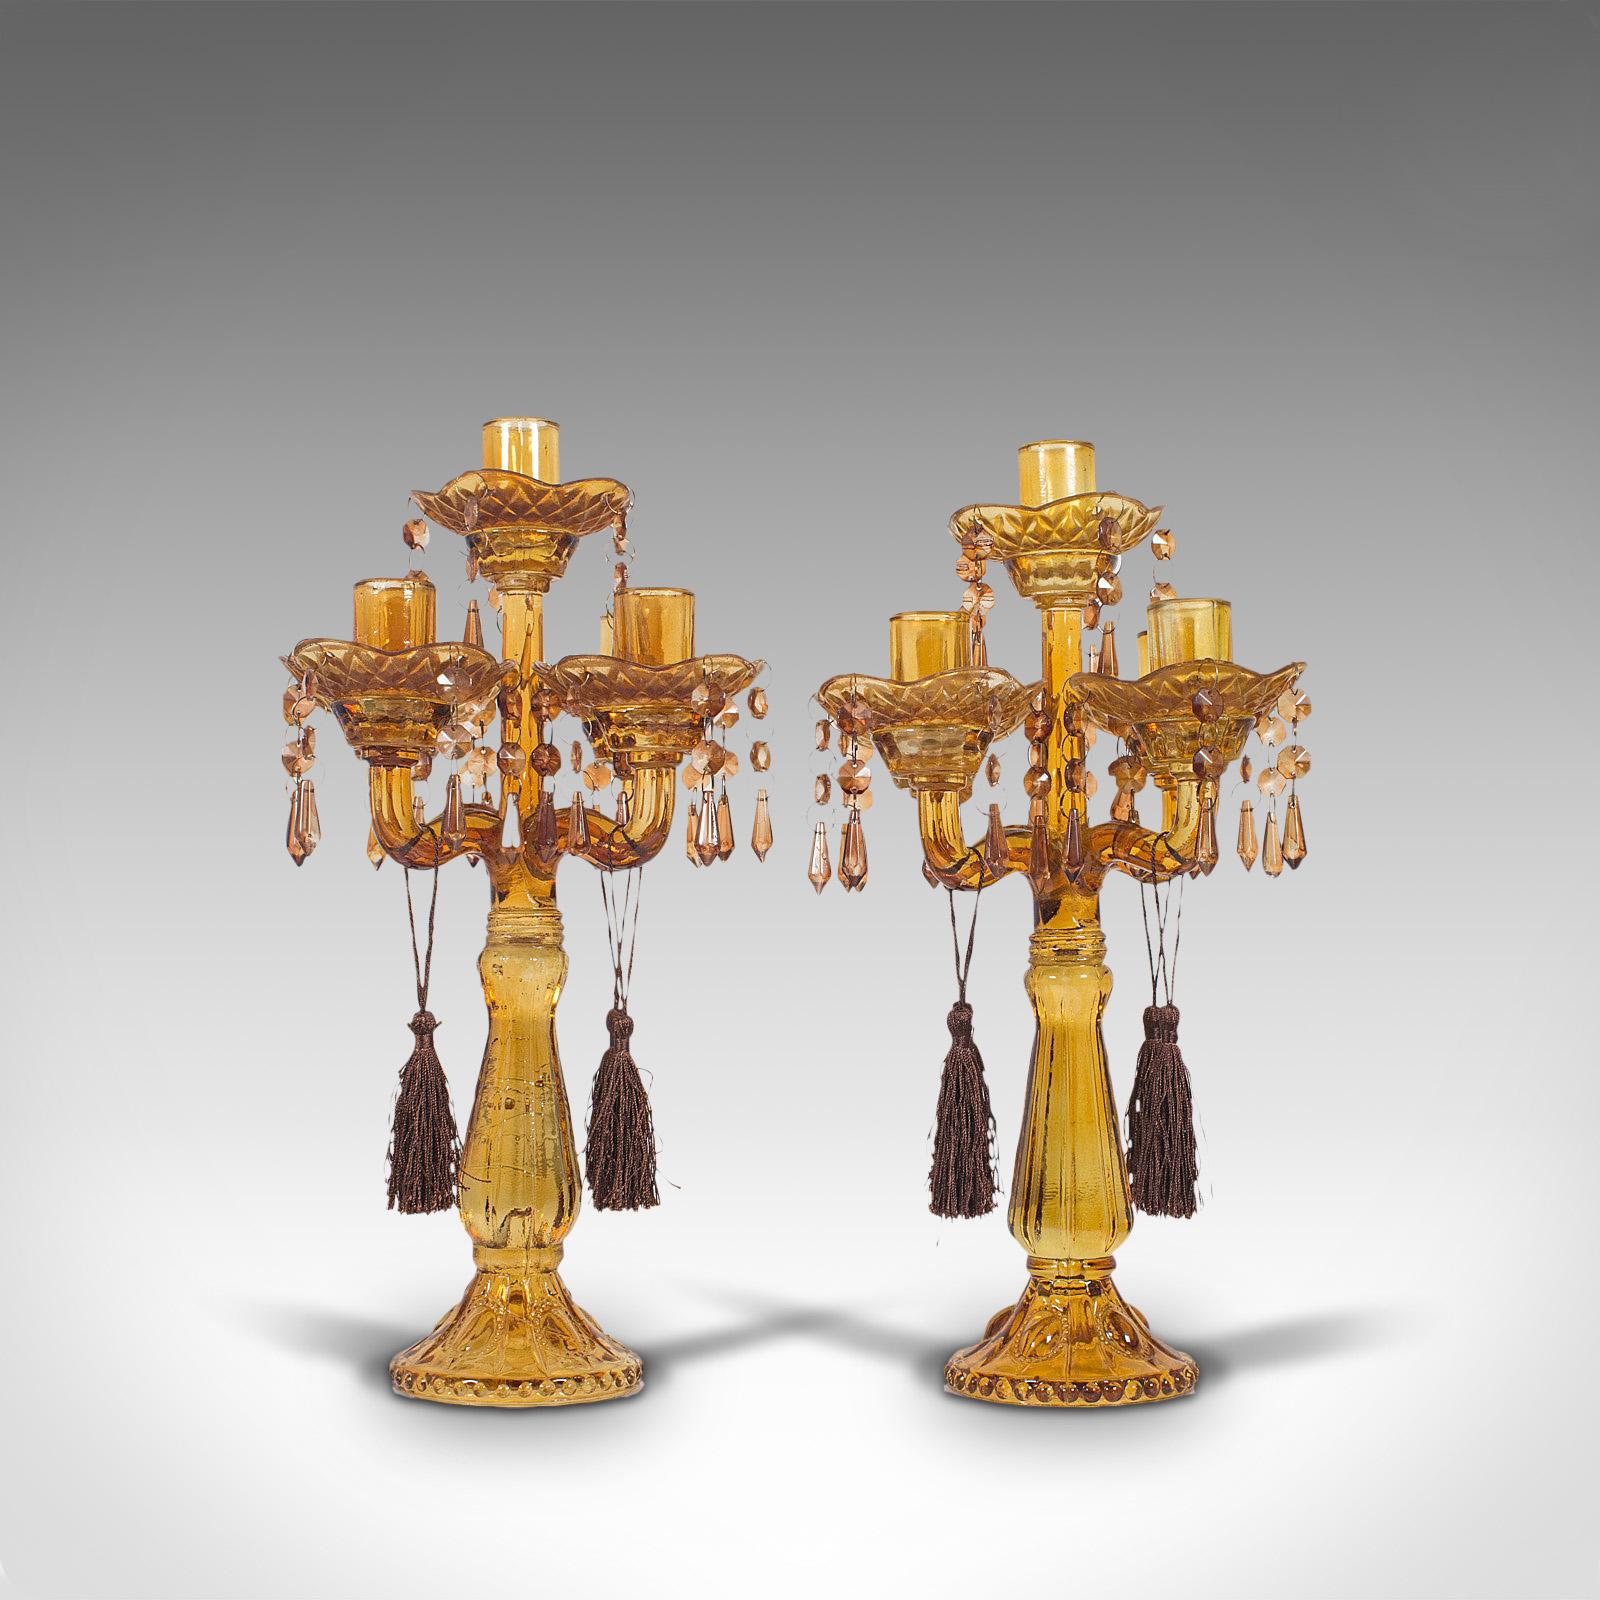 This is a pair of antique candelabra. An English, amber glass four branch table lustre or candle stand, dating to the late Victorian period, circa 1890.

Stunning color invites the eyes
Displaying a desirable aged patina - glass in good